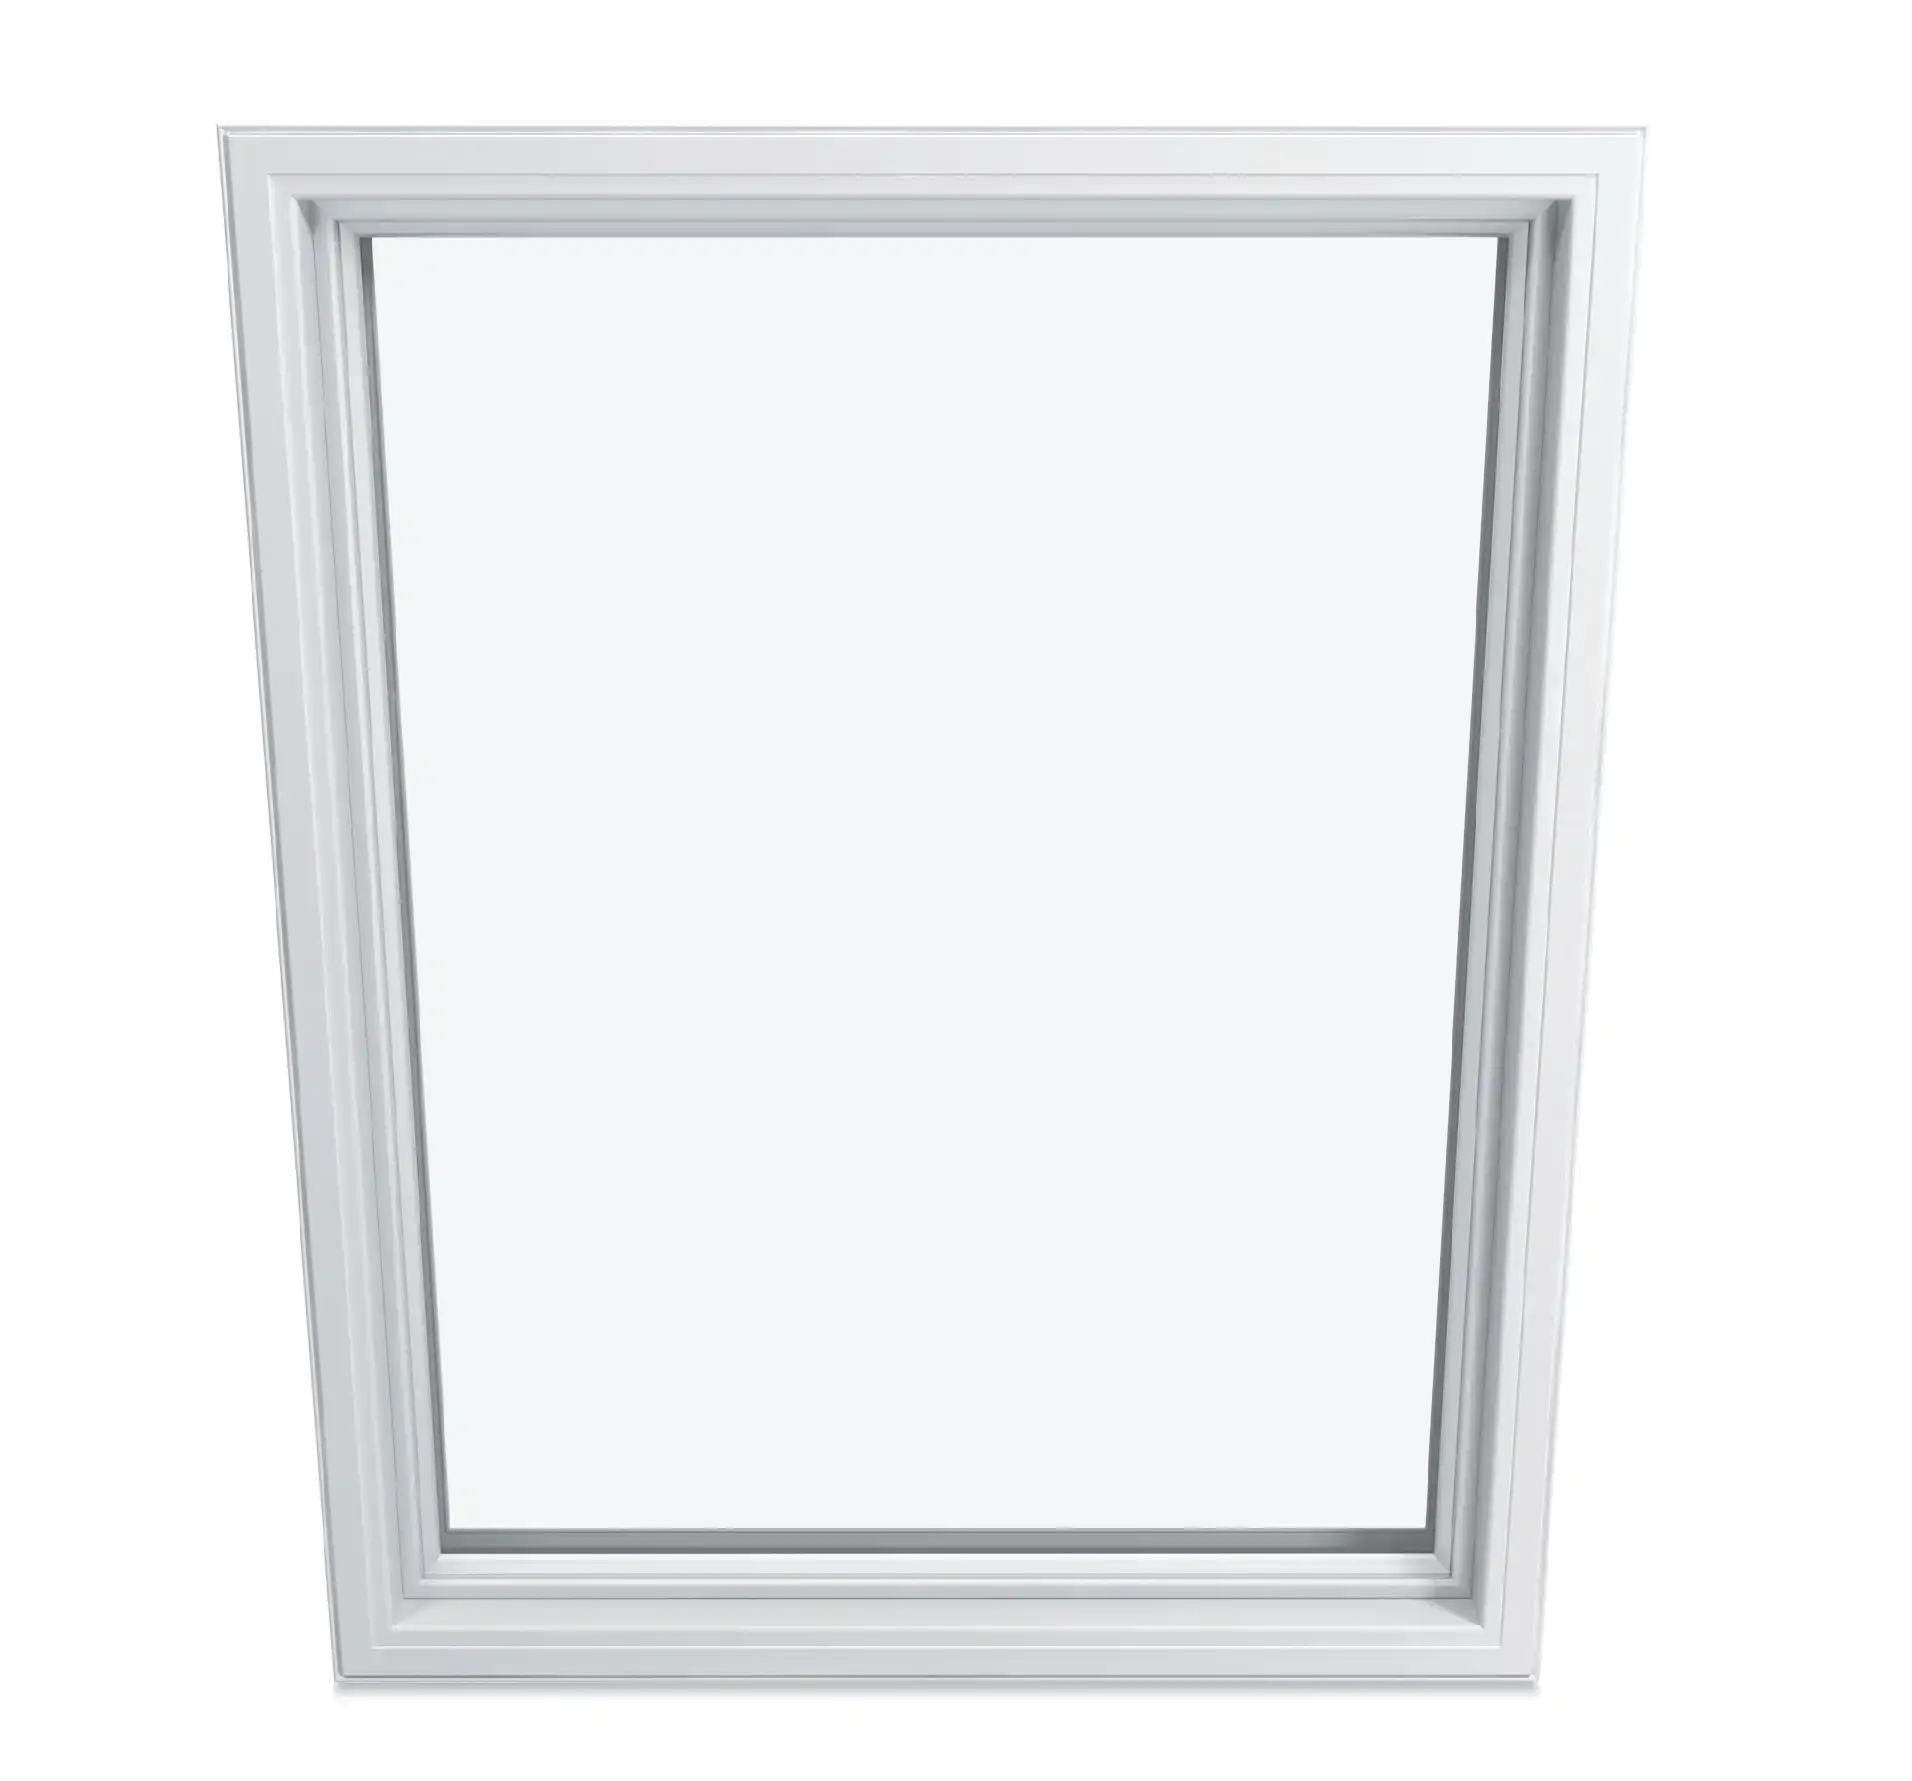 Image of a white Marvin Replacement Rectangle Picture window.